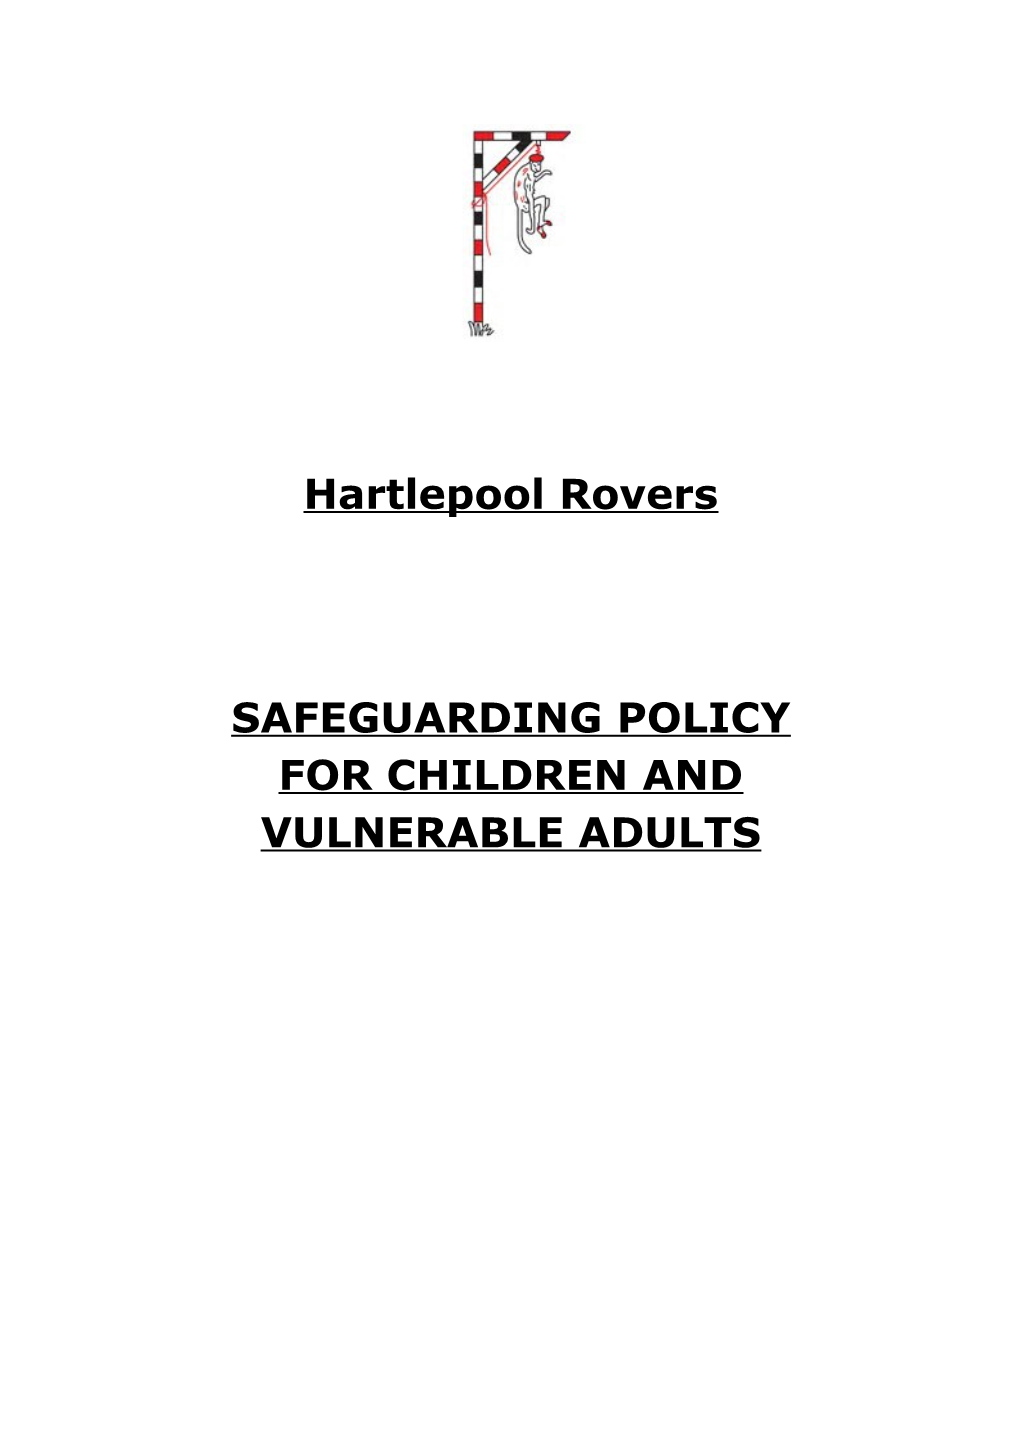 For Children and Vulnerable Adults